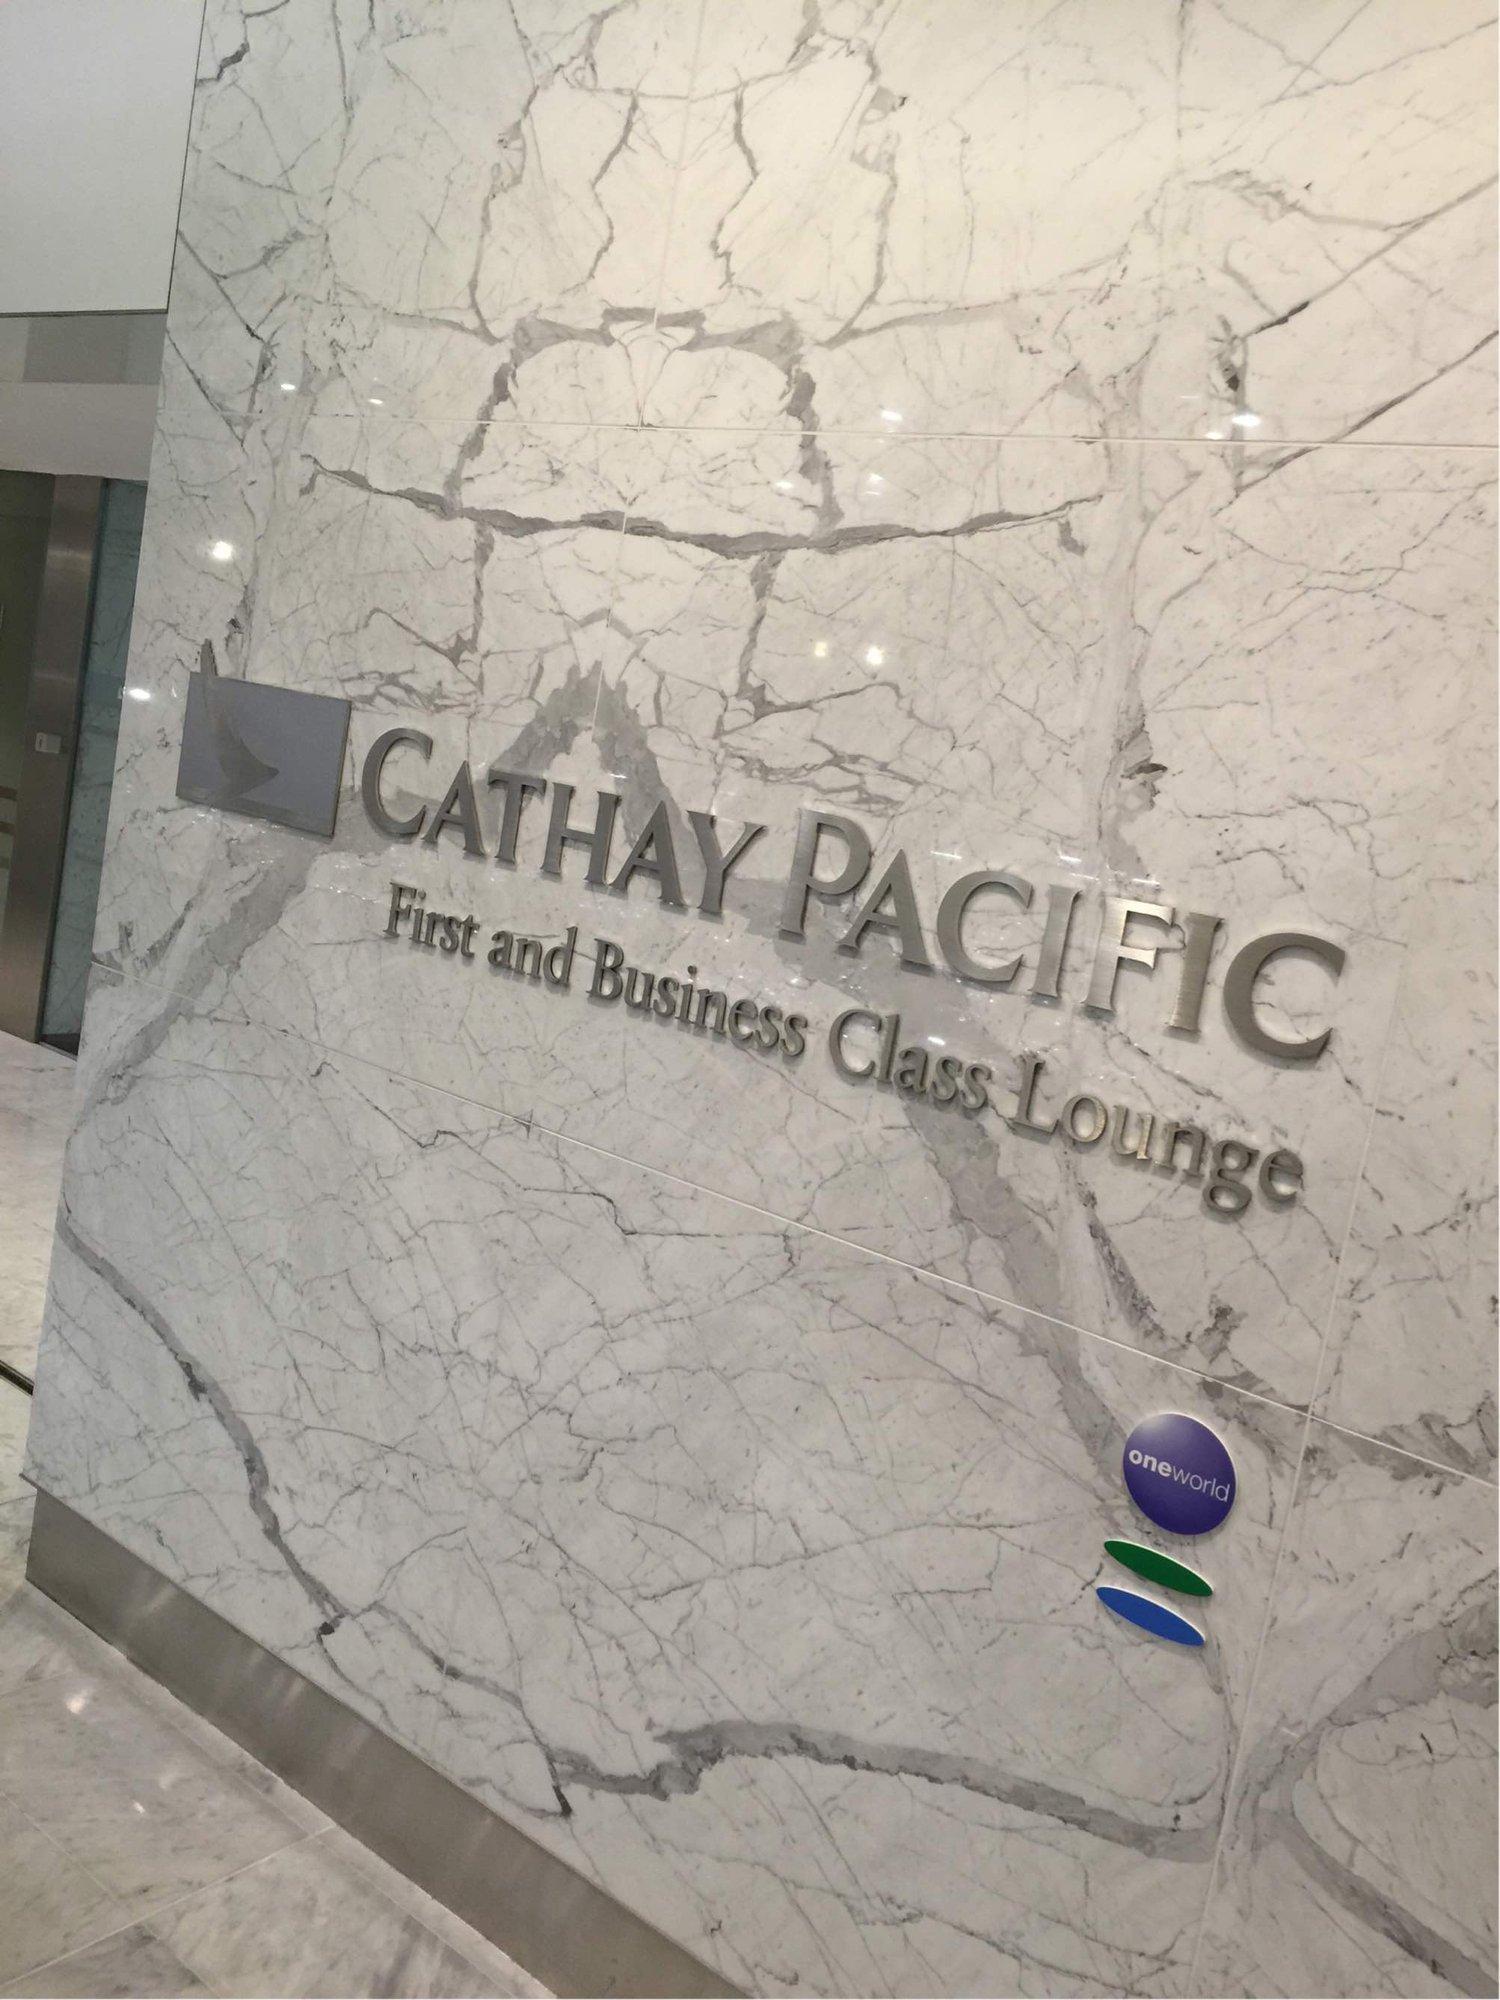 Cathay Pacific First and Business Class Lounge  image 20 of 29